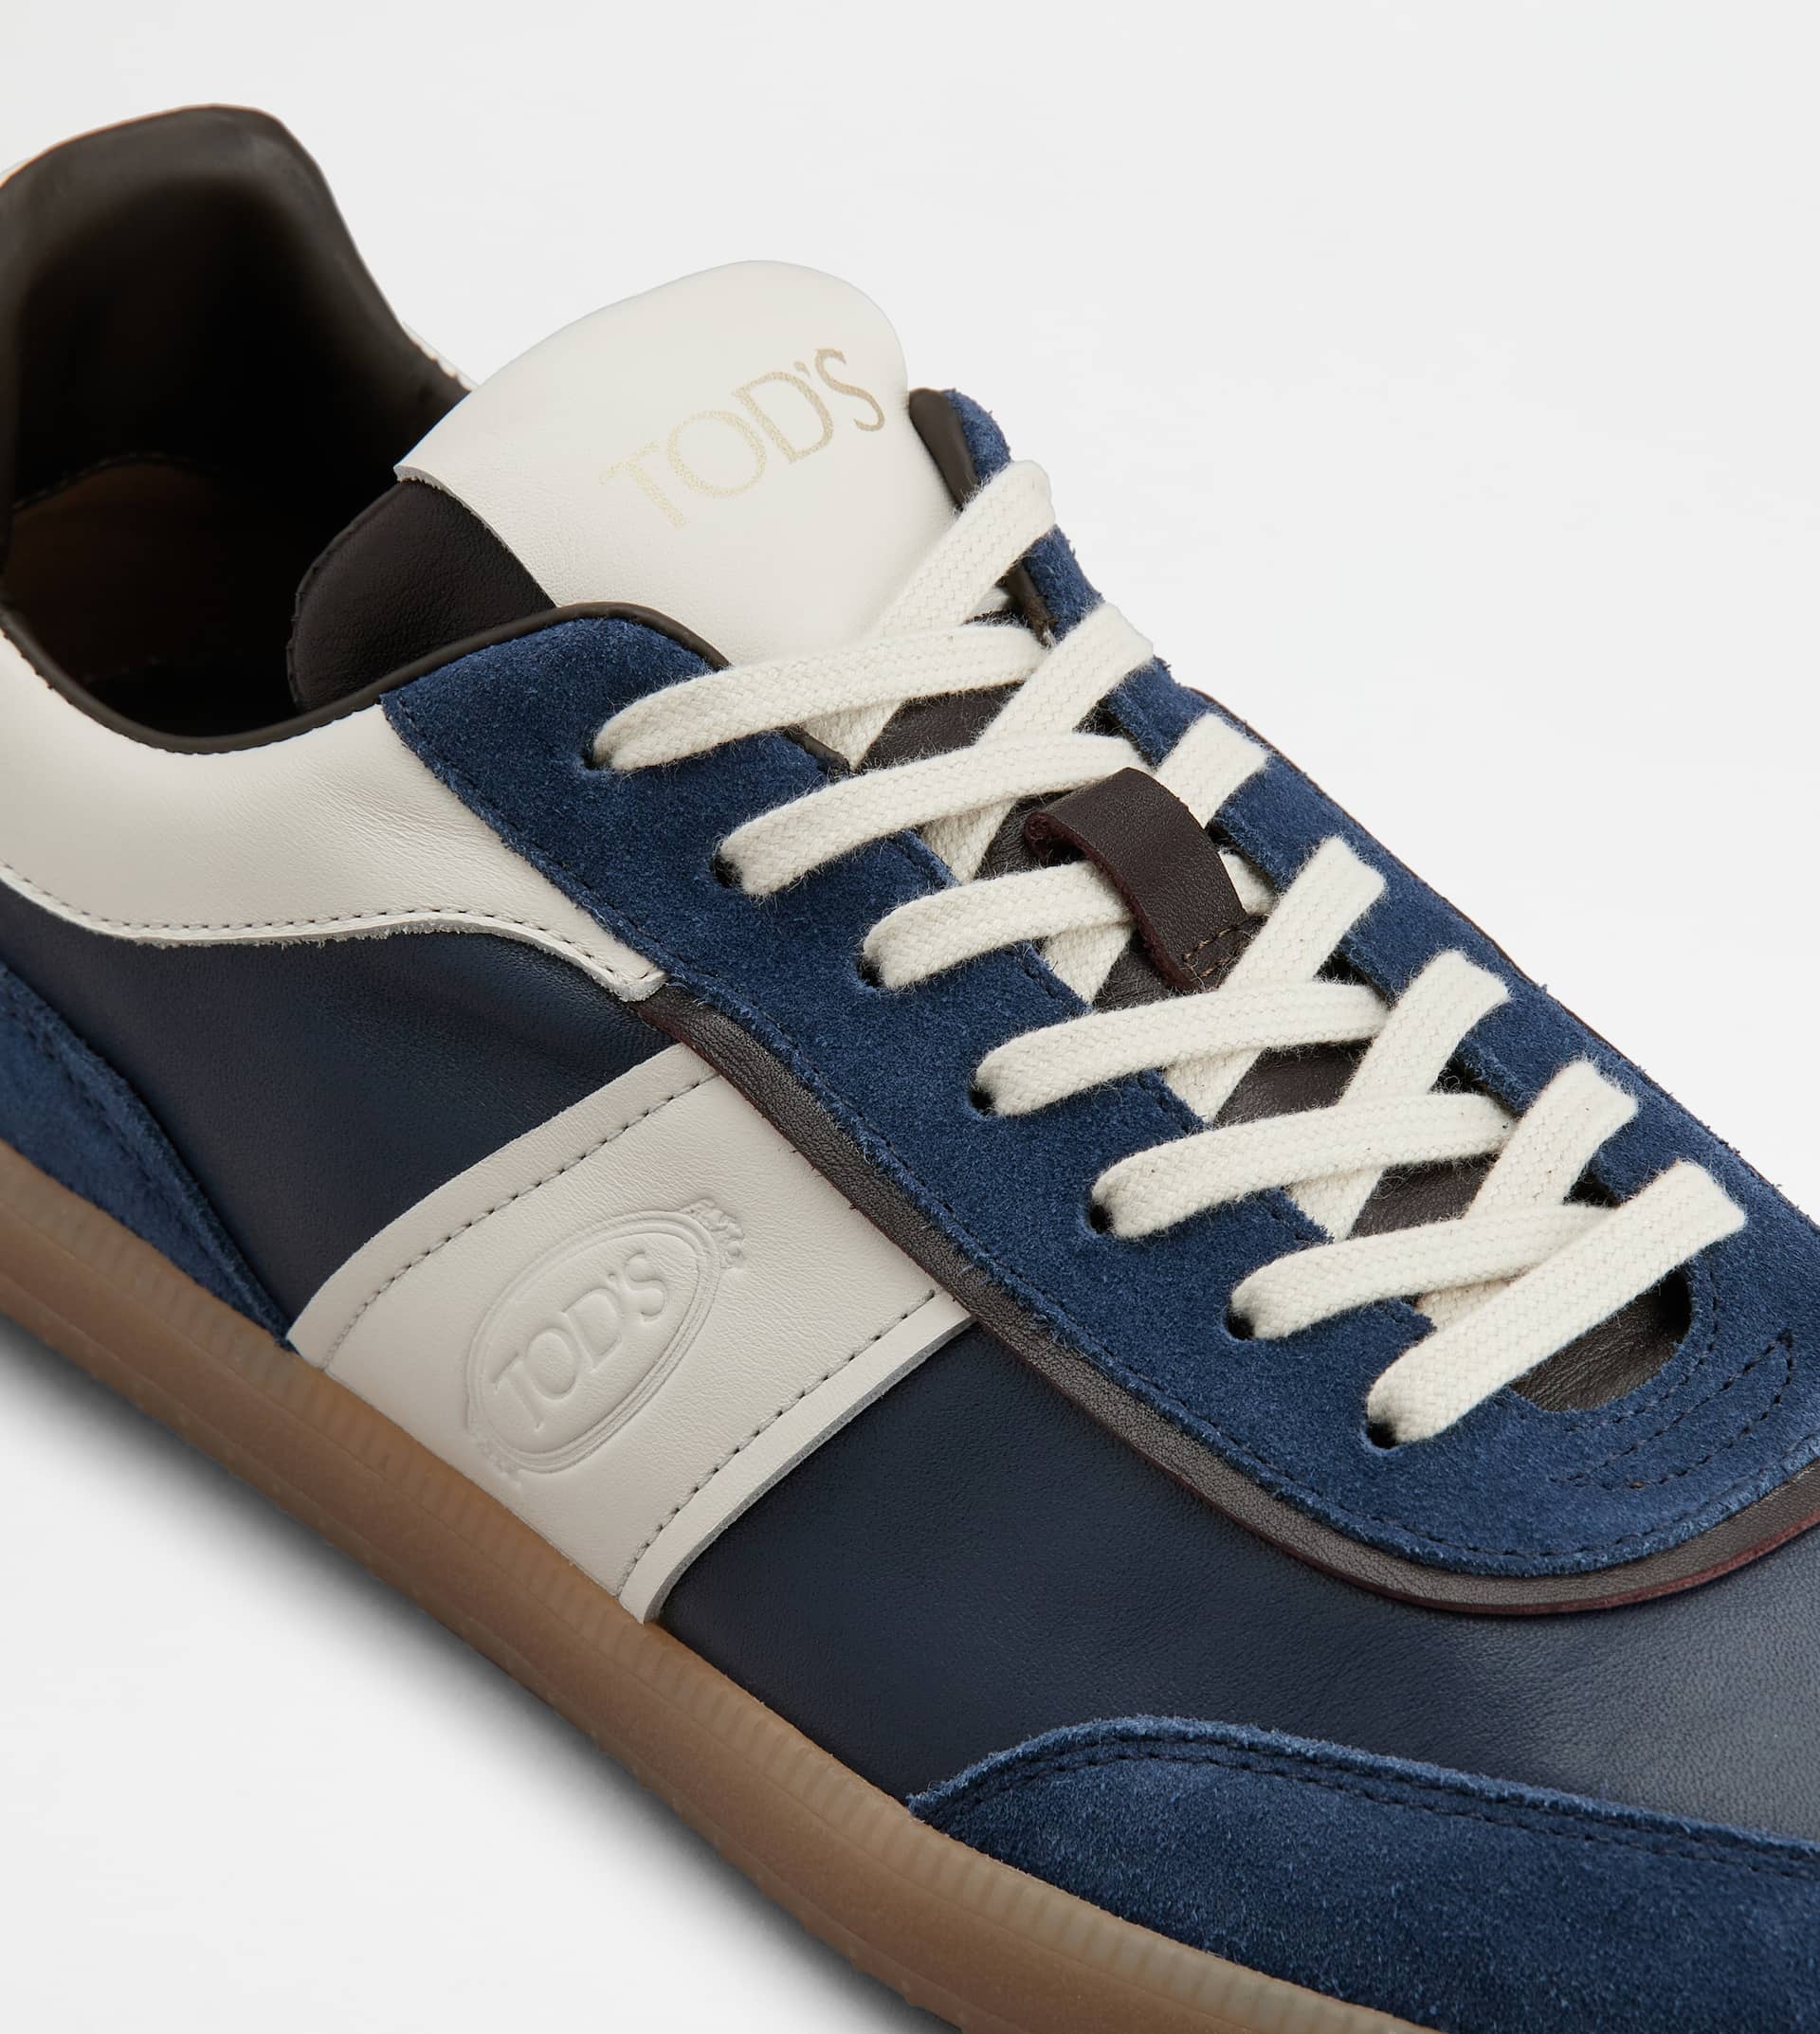 TOD'S TABS SNEAKERS IN SUEDE - WHITE, BLUE, BROWN - 5